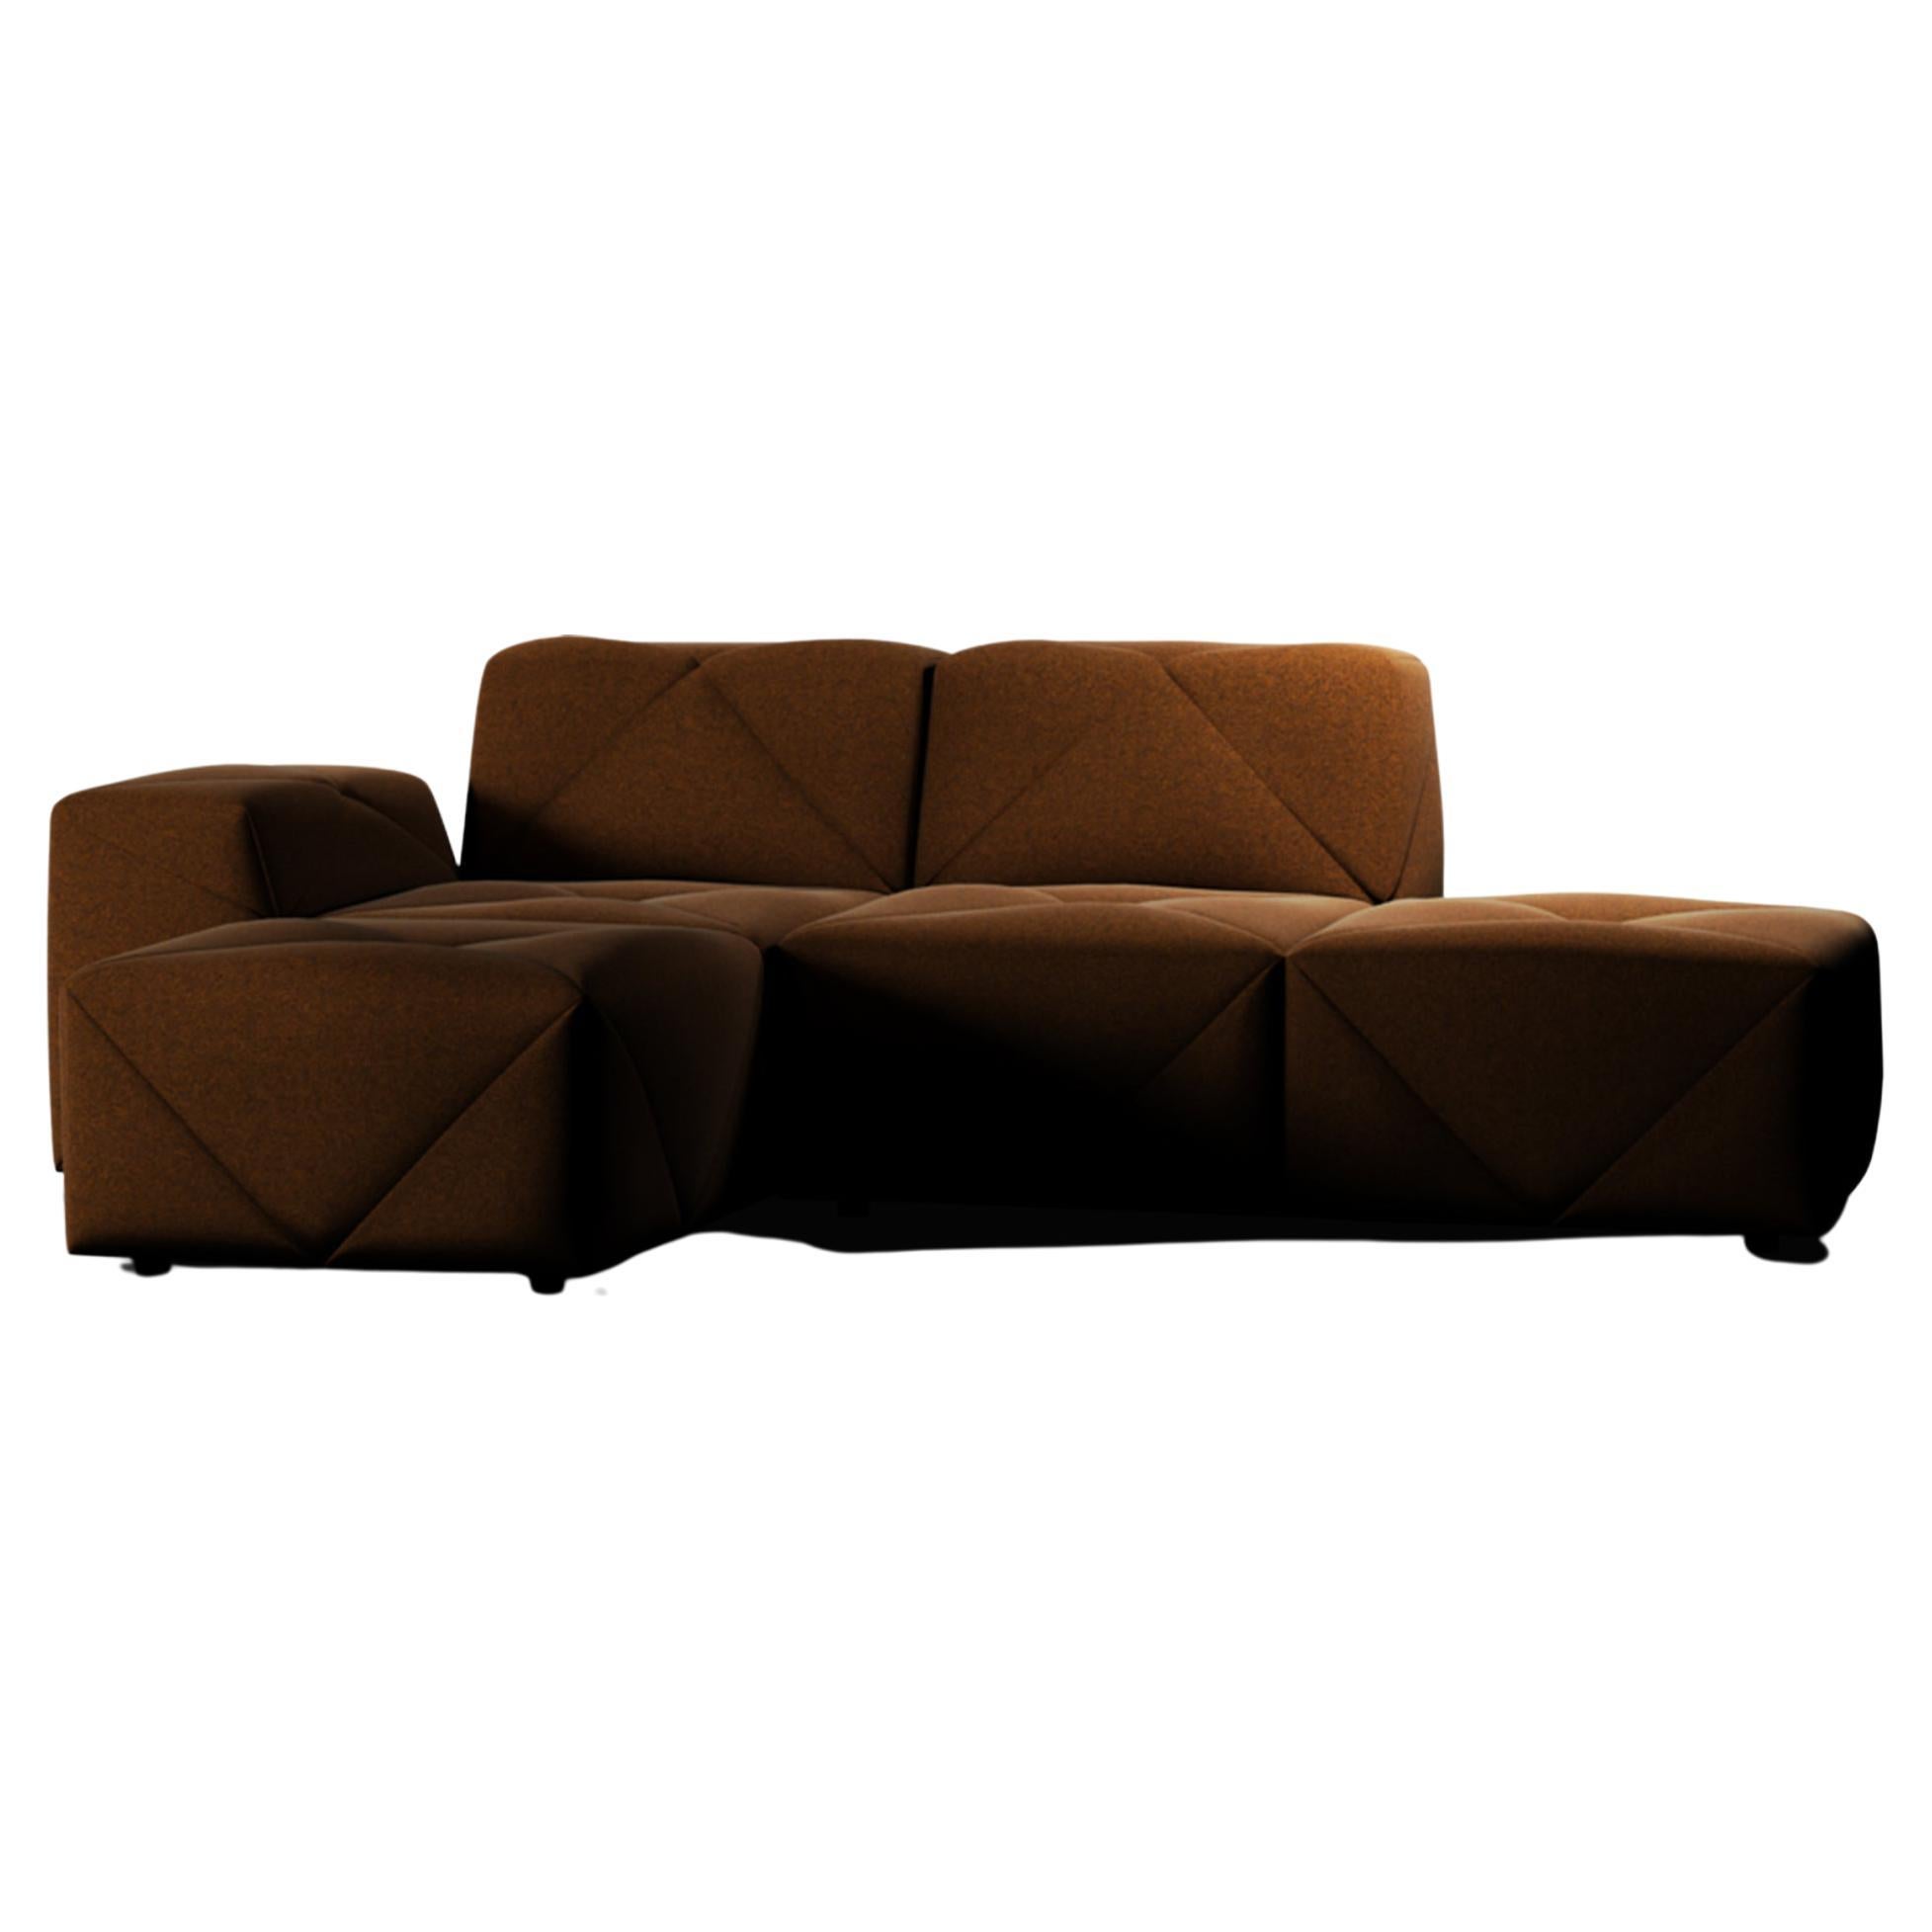 Moooi BFF Left Arm Chaise Longue Sofa in Divina Melange 3, 571 Copper Upholstery